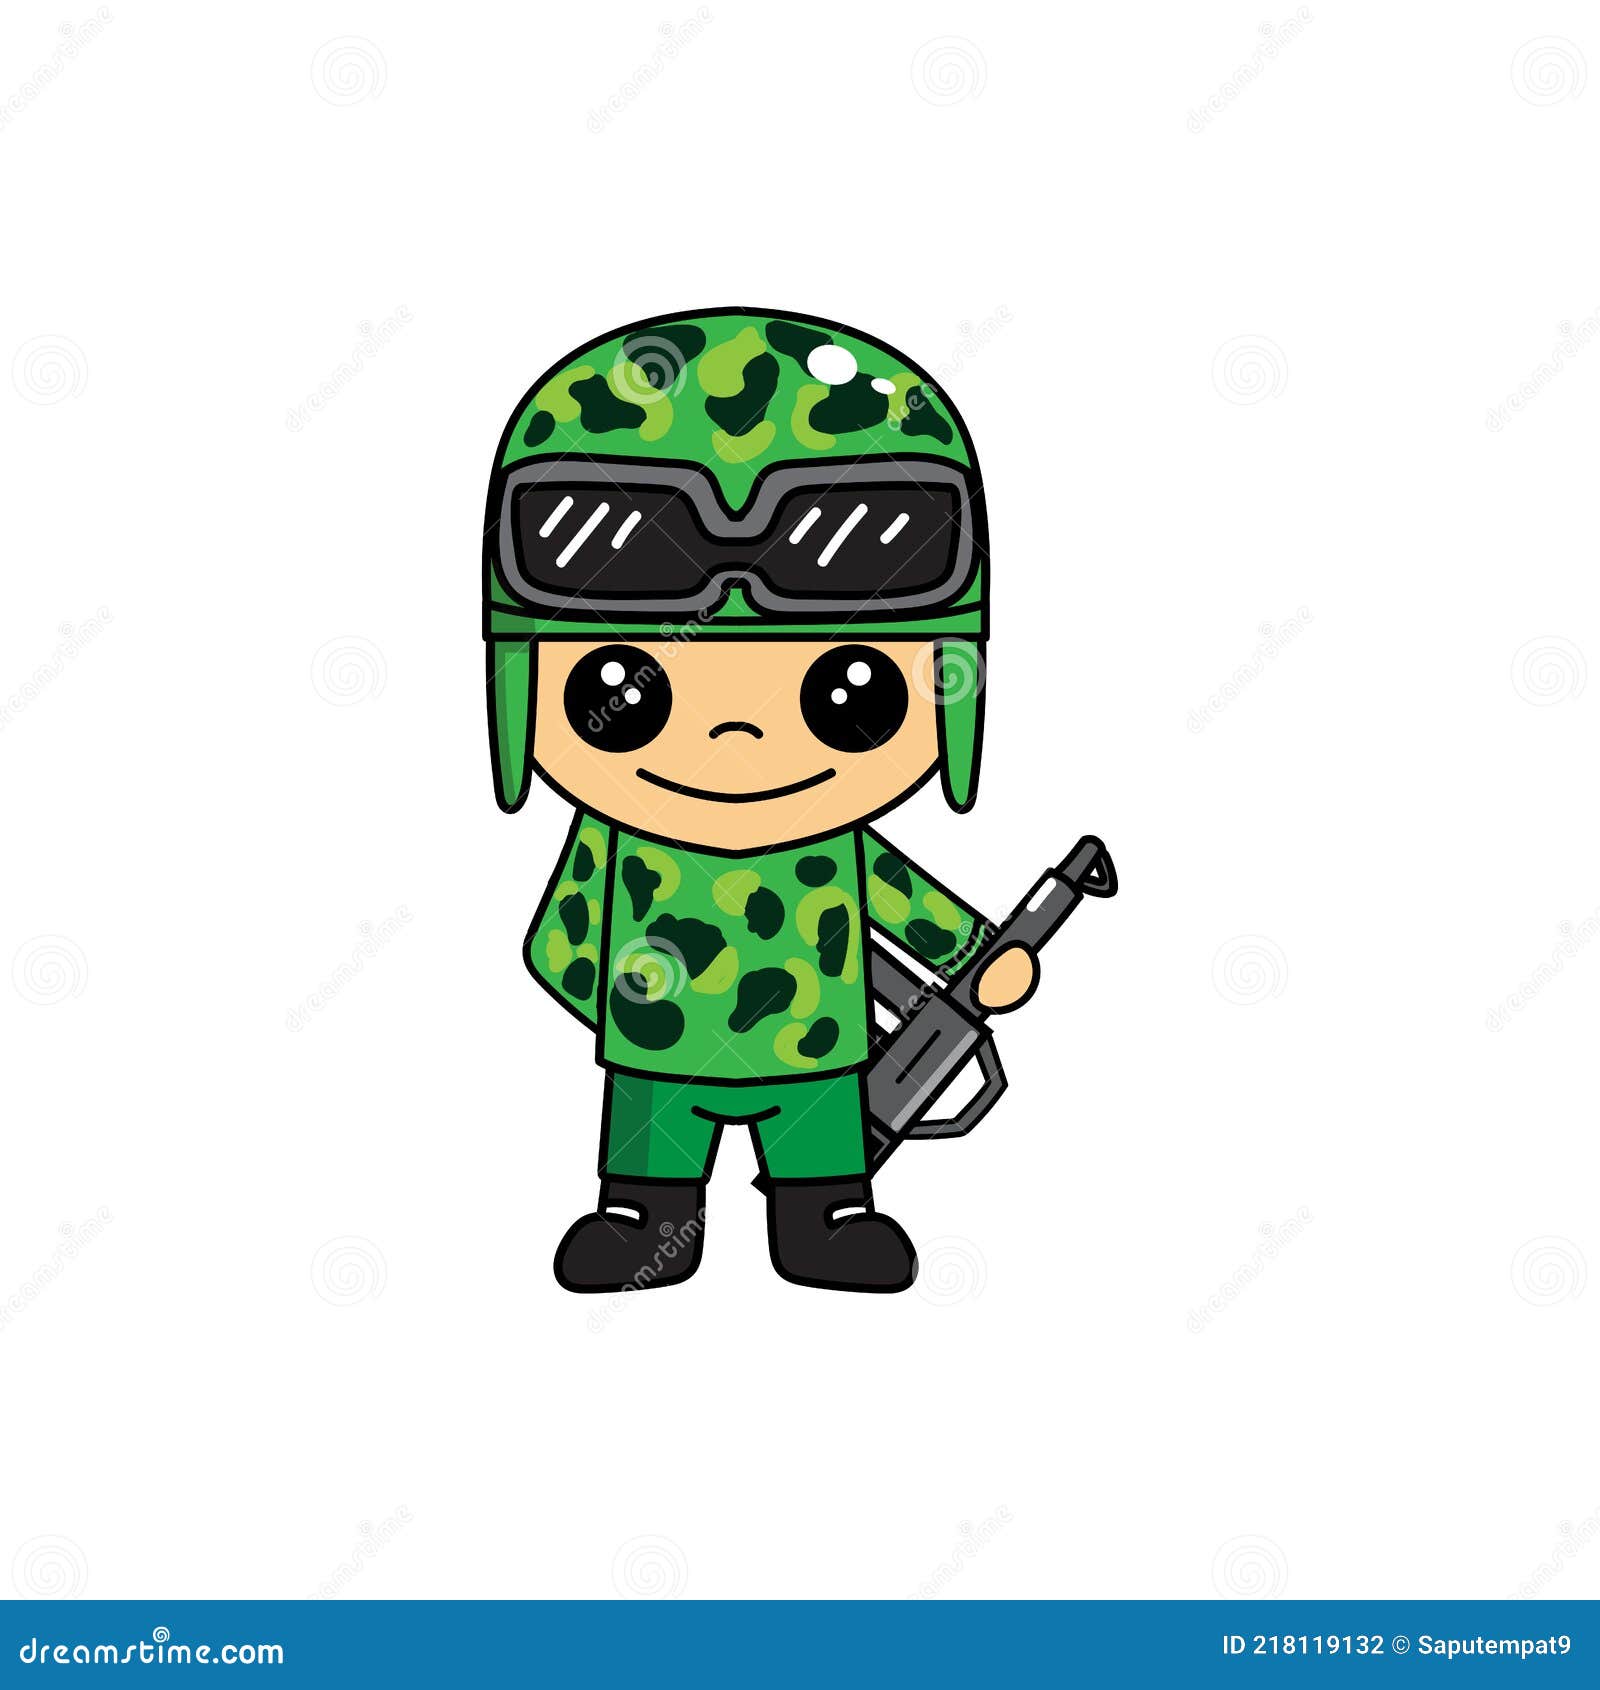 Mascot Illustration of Army Cartoon Character or Cute Soldier with ...